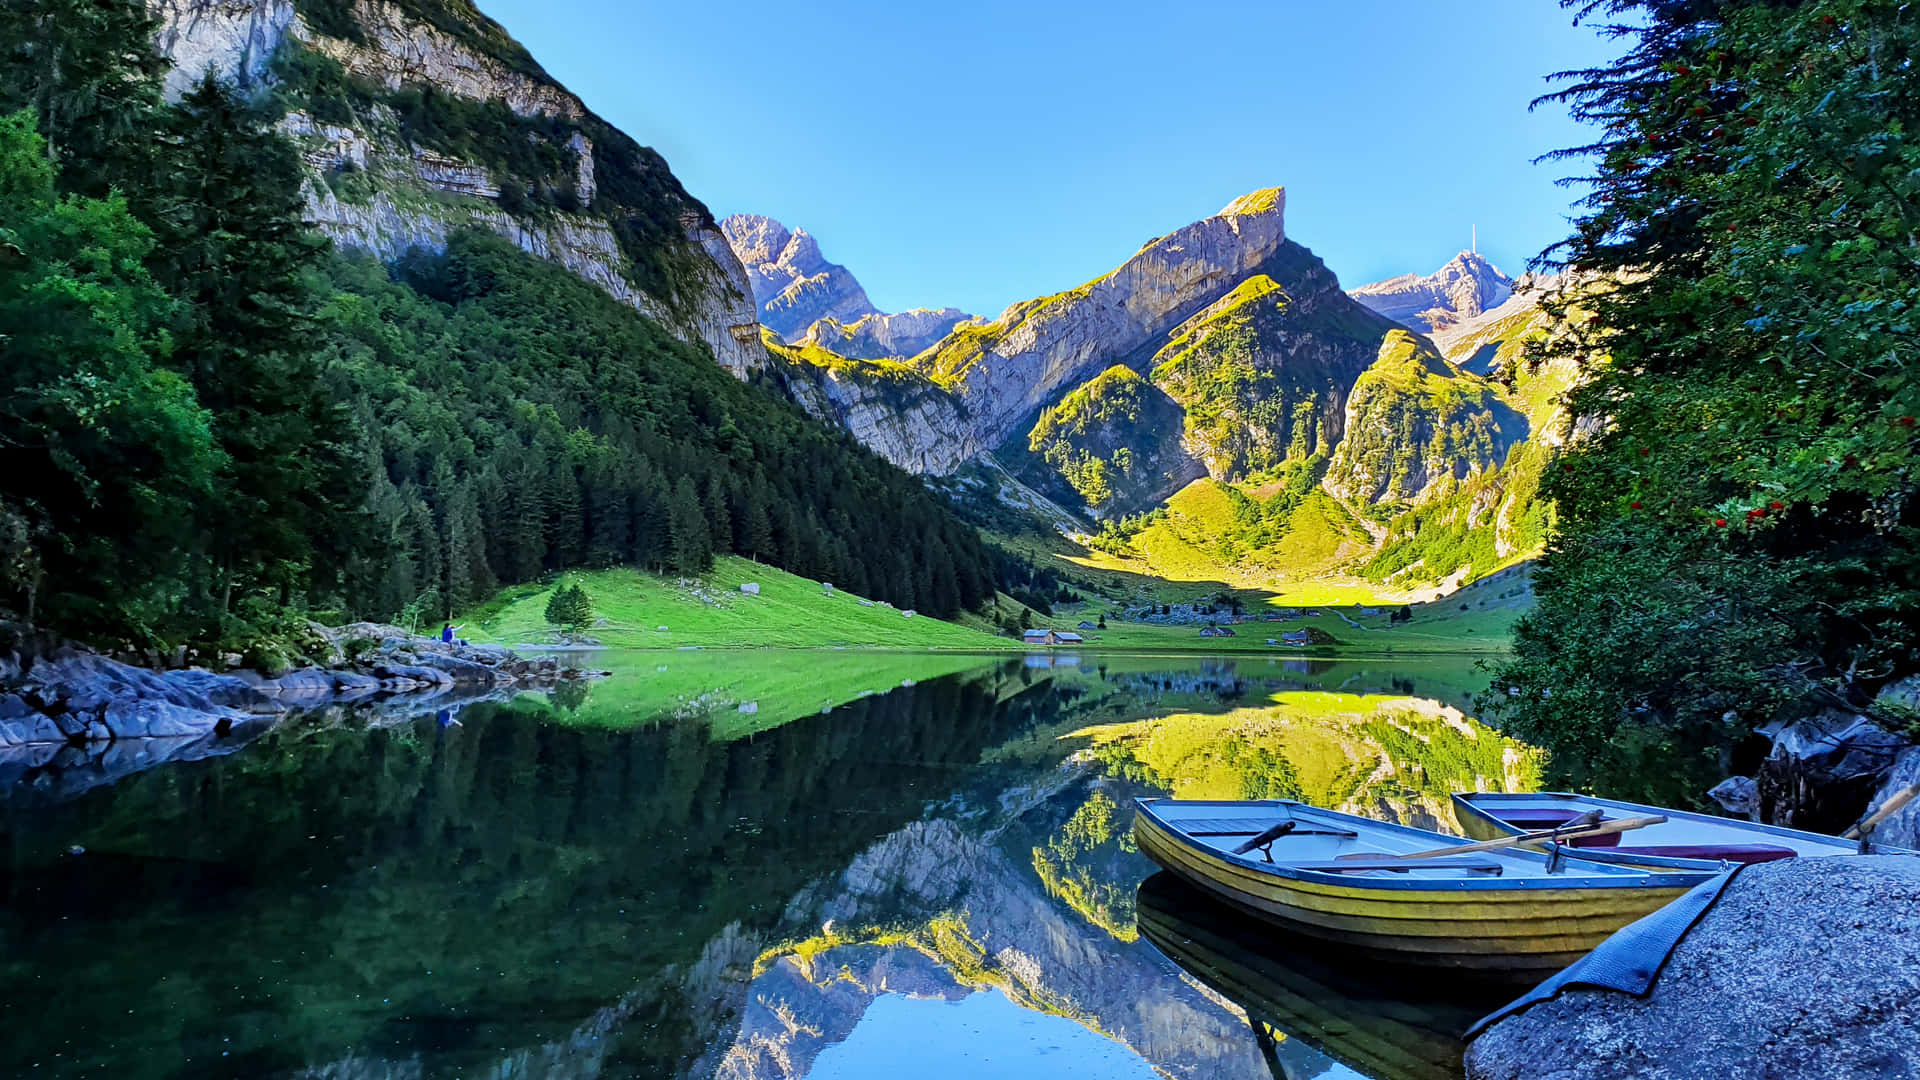 "A majestic lake surrounded by beautiful mountains." Wallpaper